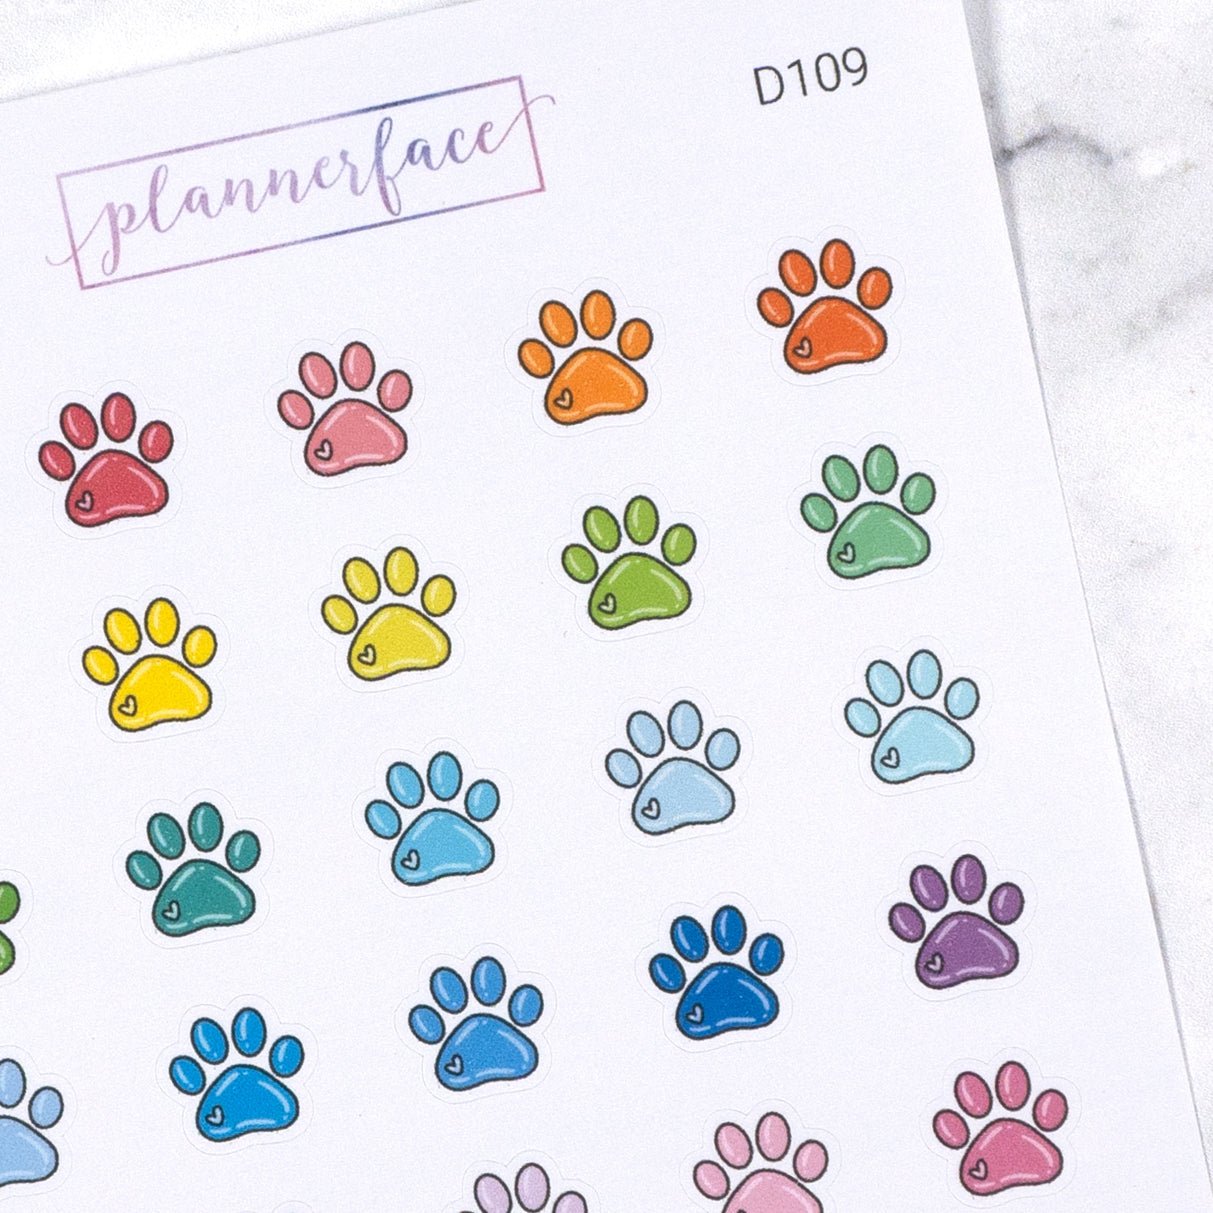 Paw Print V2 Multicolour Doodles by Plannerface